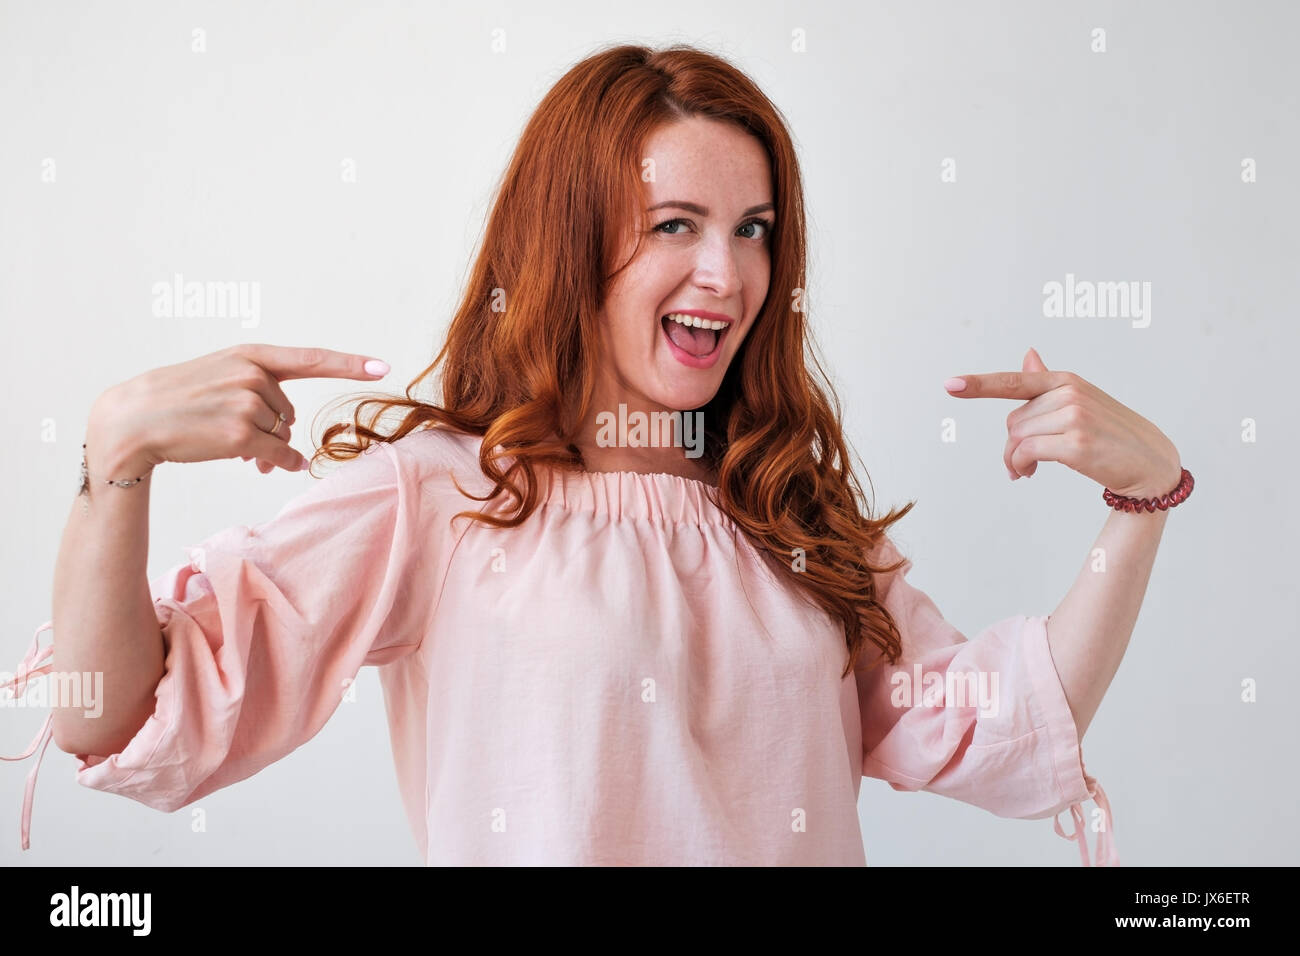 Portrair of caicasian red haired woman proud of herself. Stock Photo